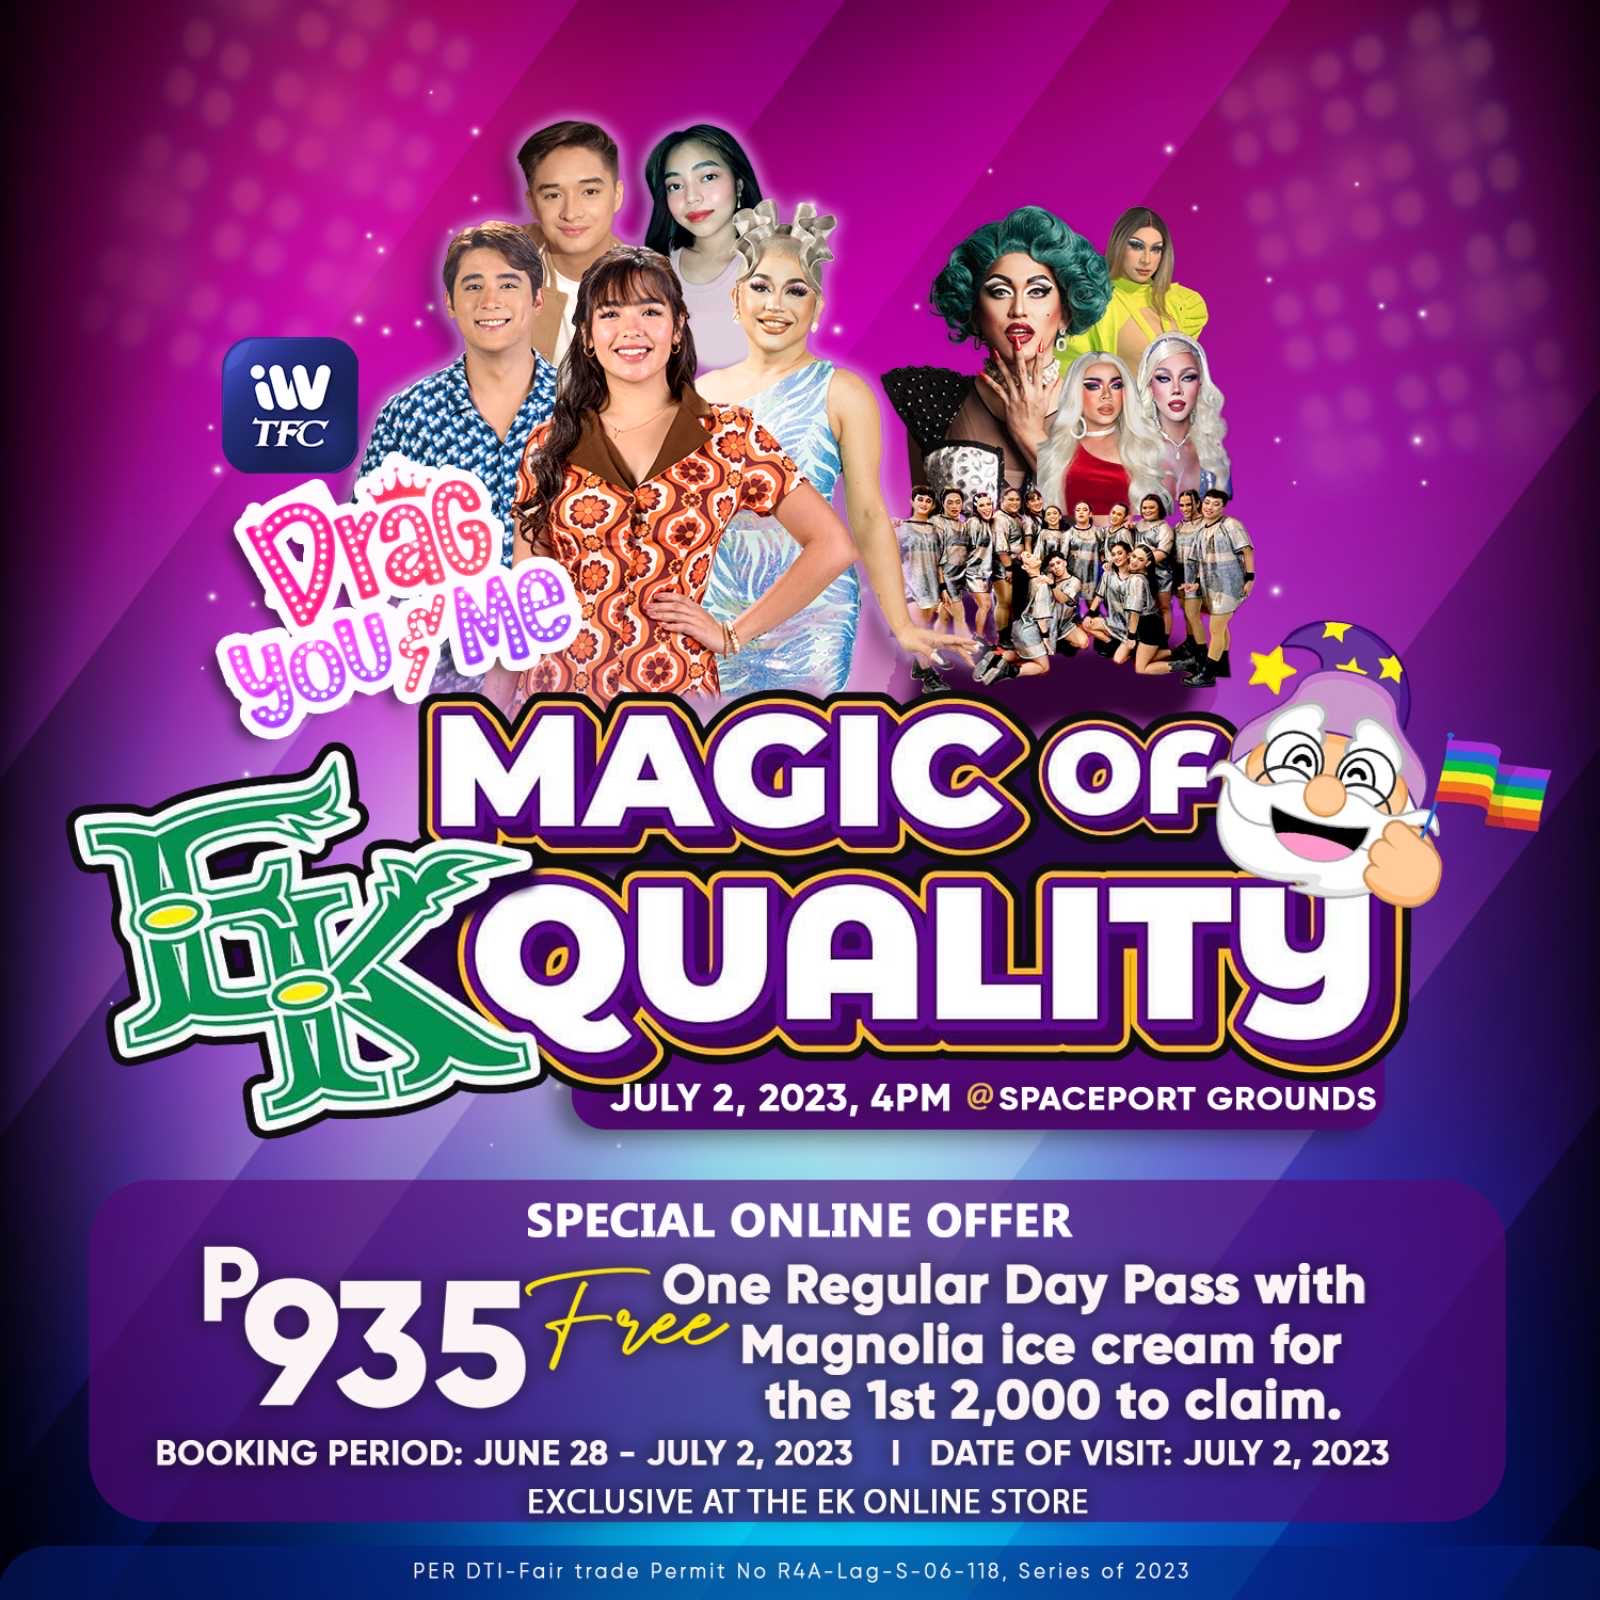 Diversity, Equality and Inclusivity: Magic of EKquality at Enchanted Kingdom to Celebrate Pride Month!